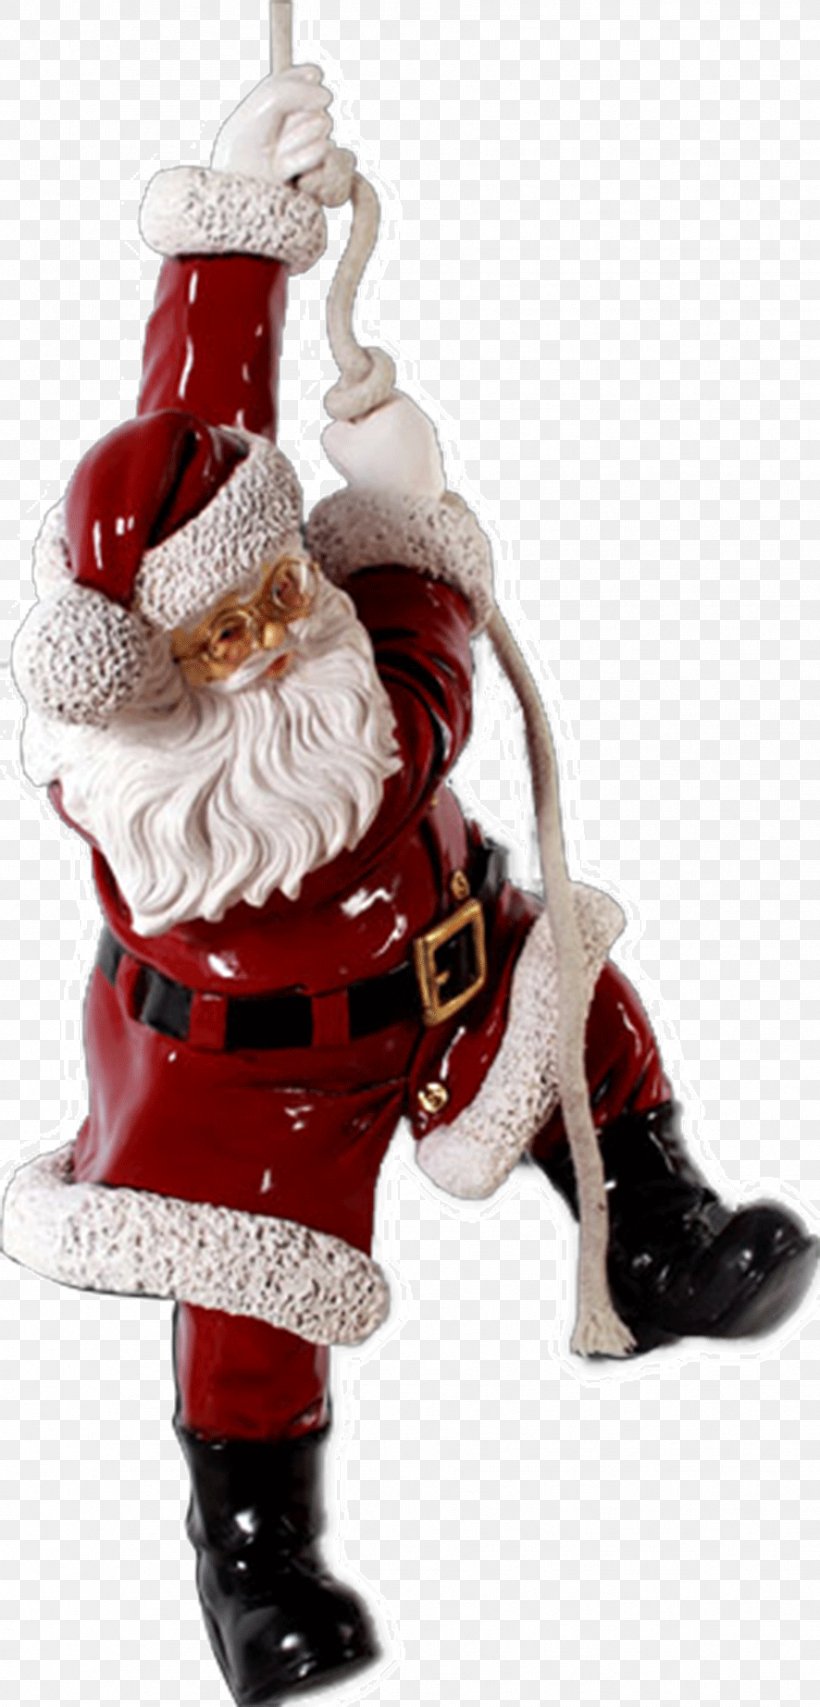 Santa Claus Candy Cane Christmas Ornament Christmas Decoration, PNG, 886x1845px, Santa Claus, Candy Cane, Christmas, Christmas Decoration, Christmas Ornament Download Free